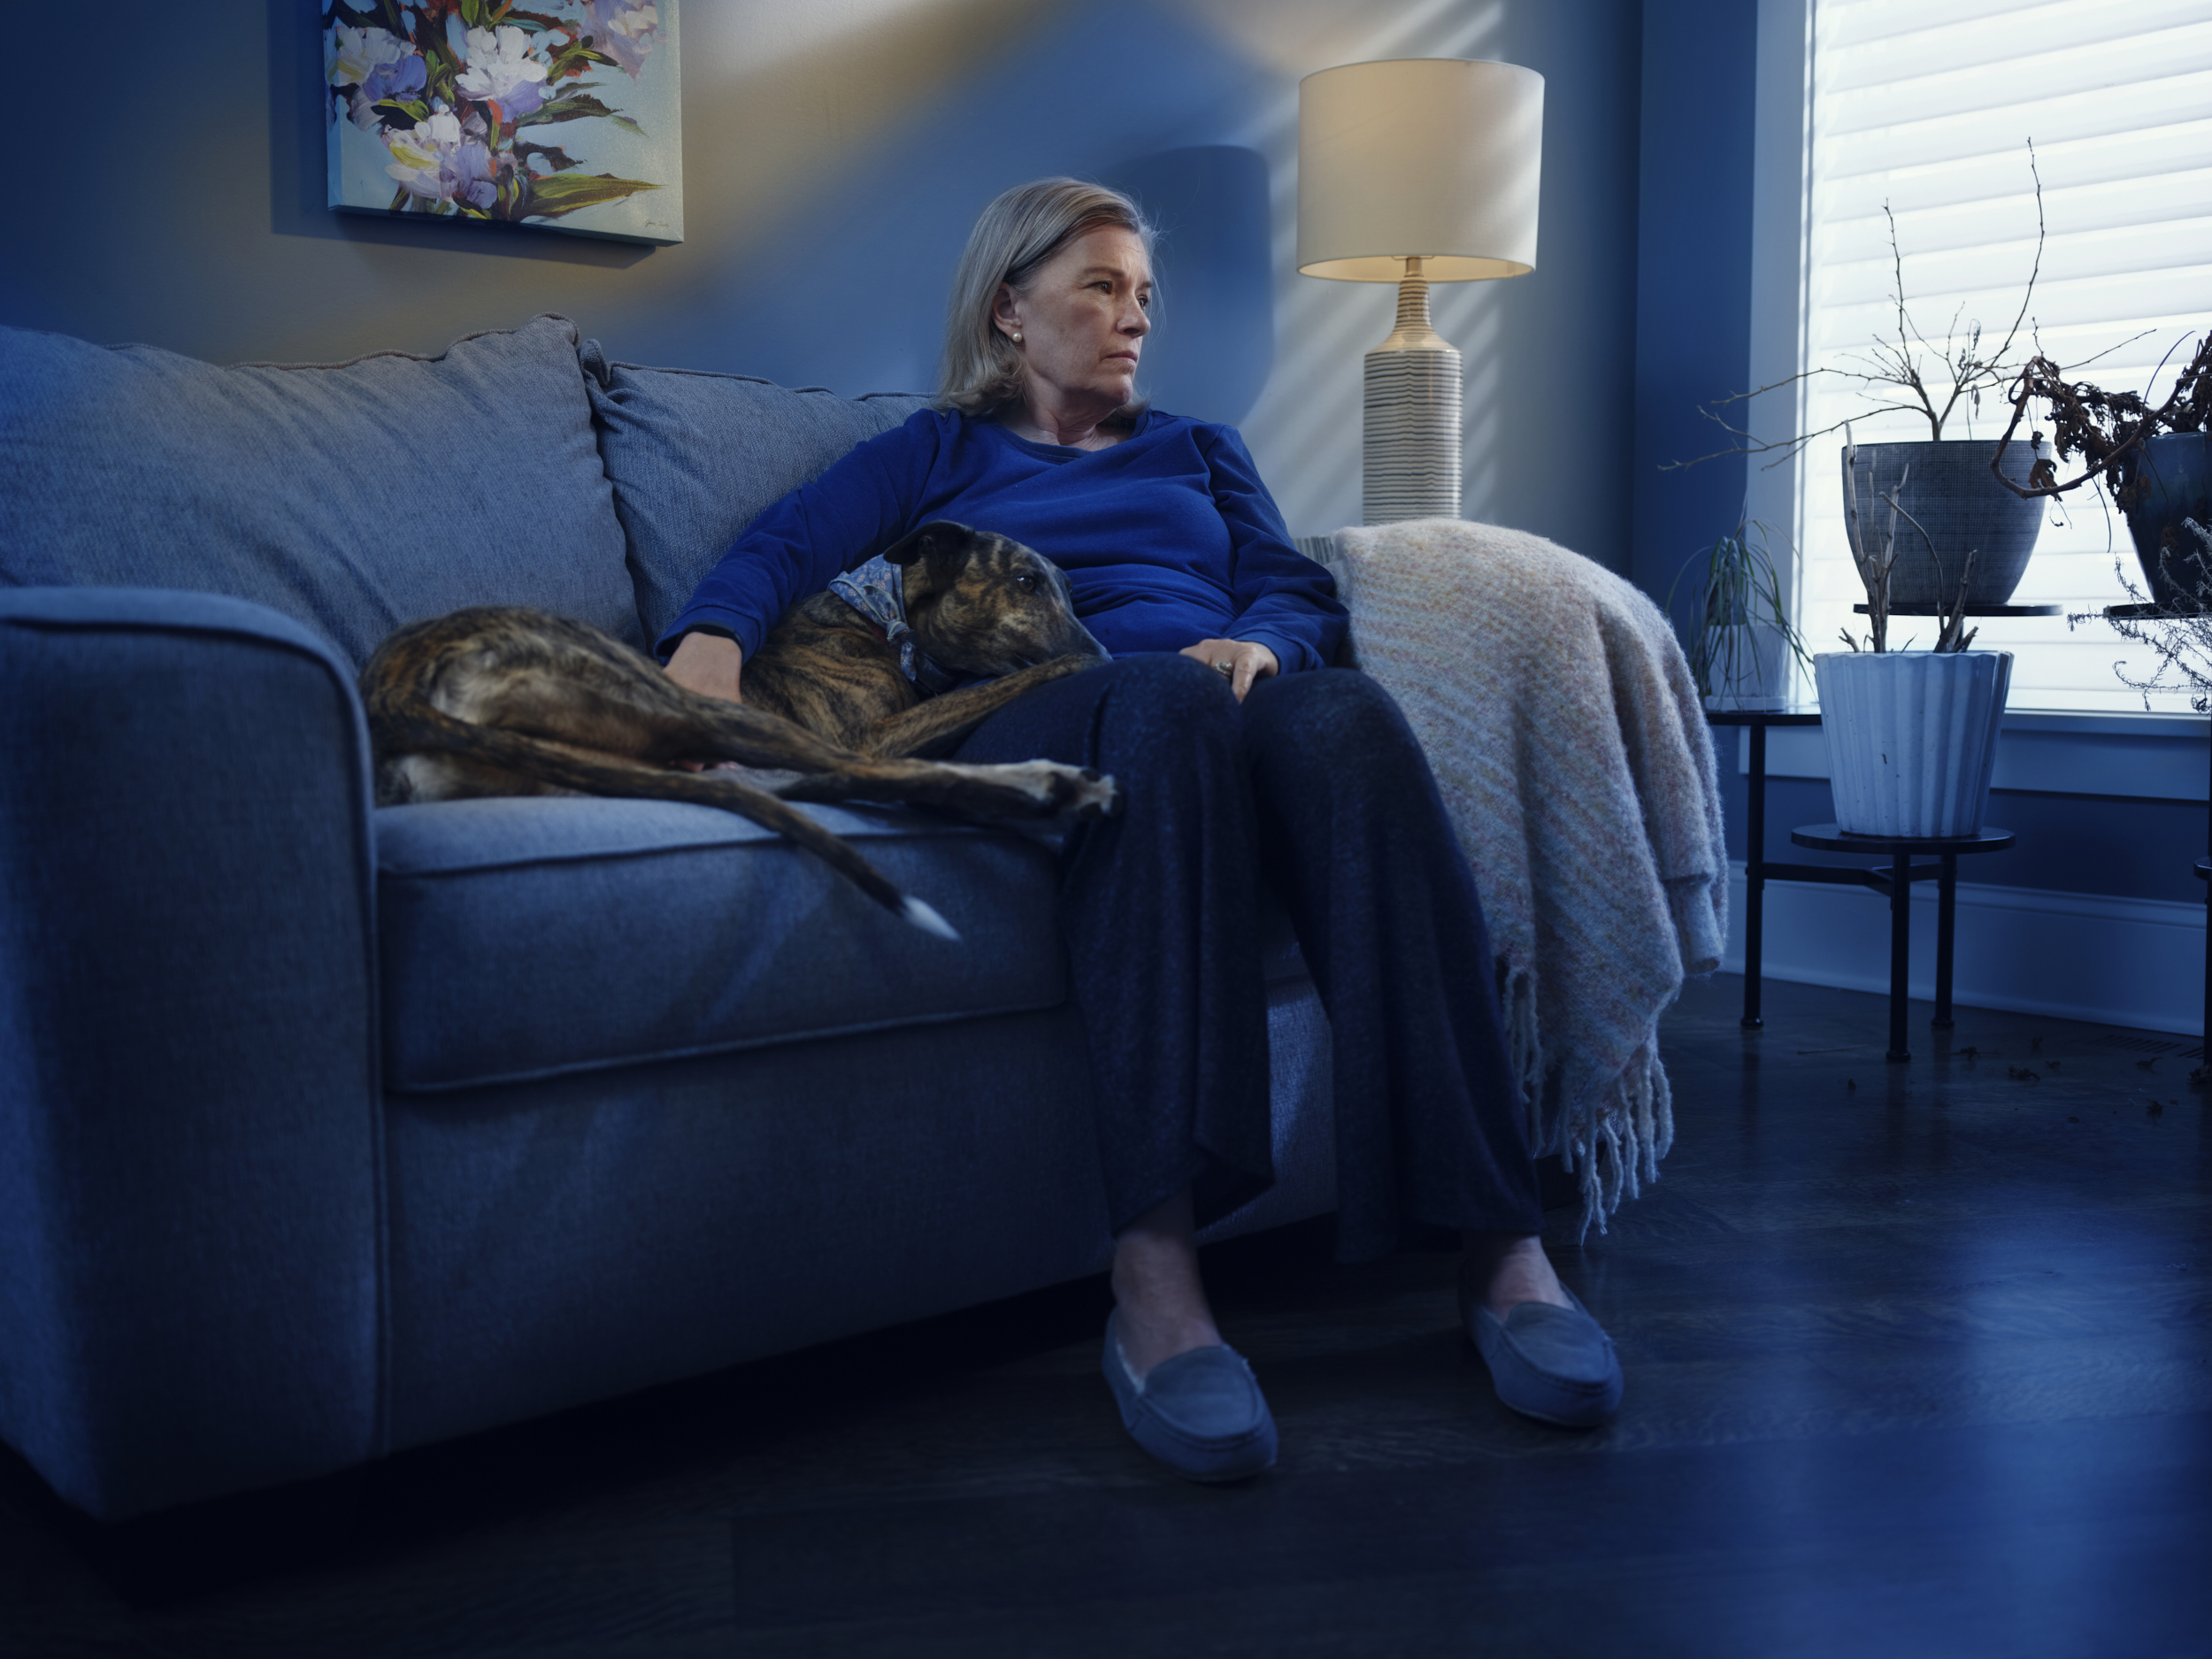 Depressed senior woman sitting with greyhound on couch